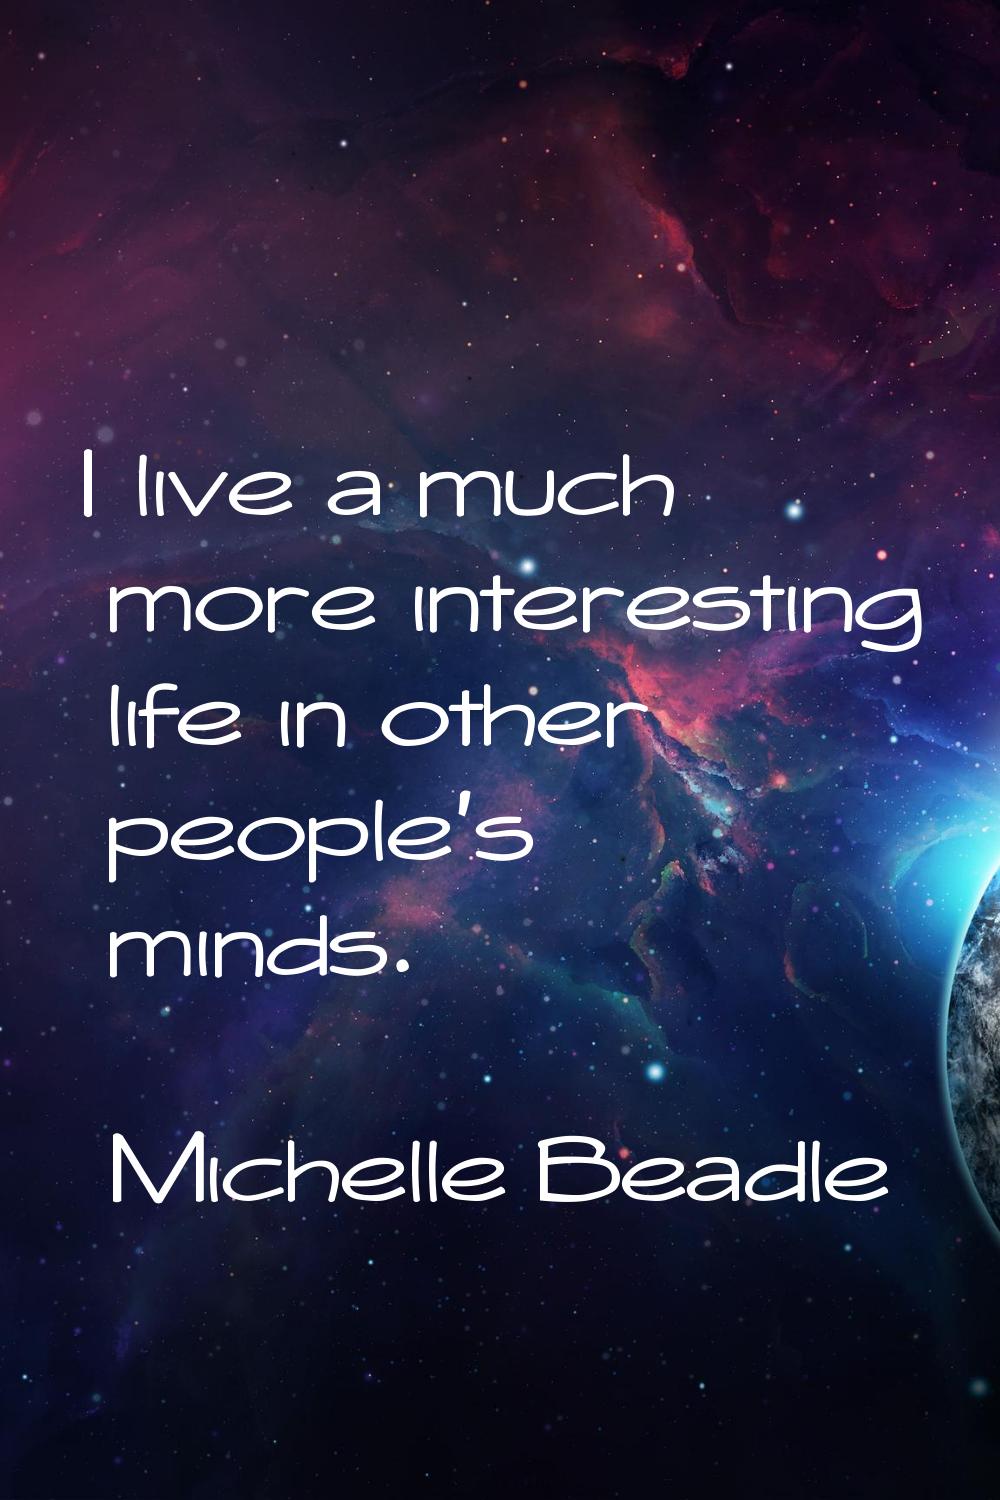 I live a much more interesting life in other people's minds.